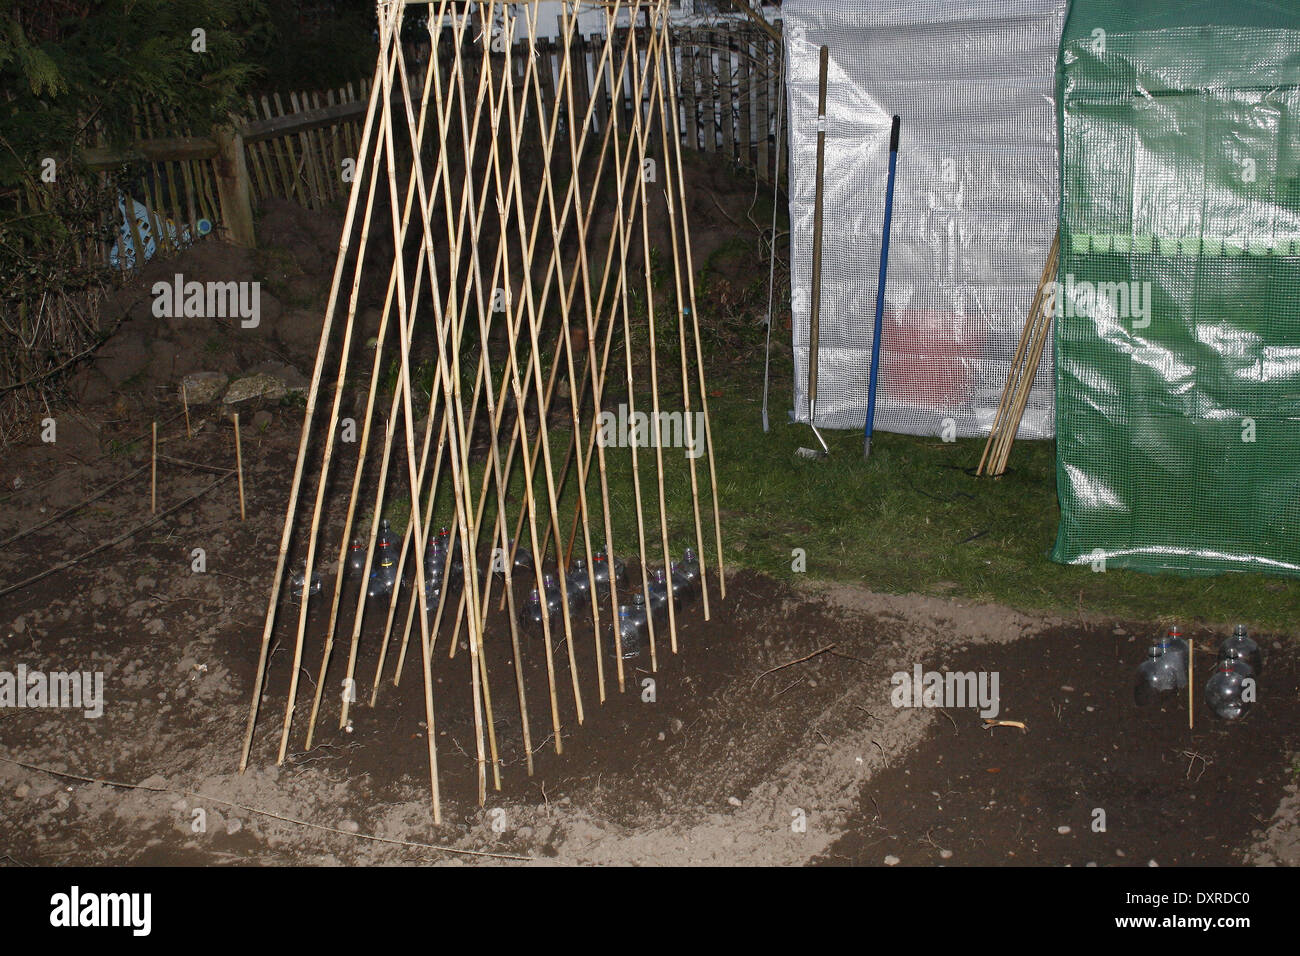 wigwam of bamboo canes in garden with greenhouses Stock Photo